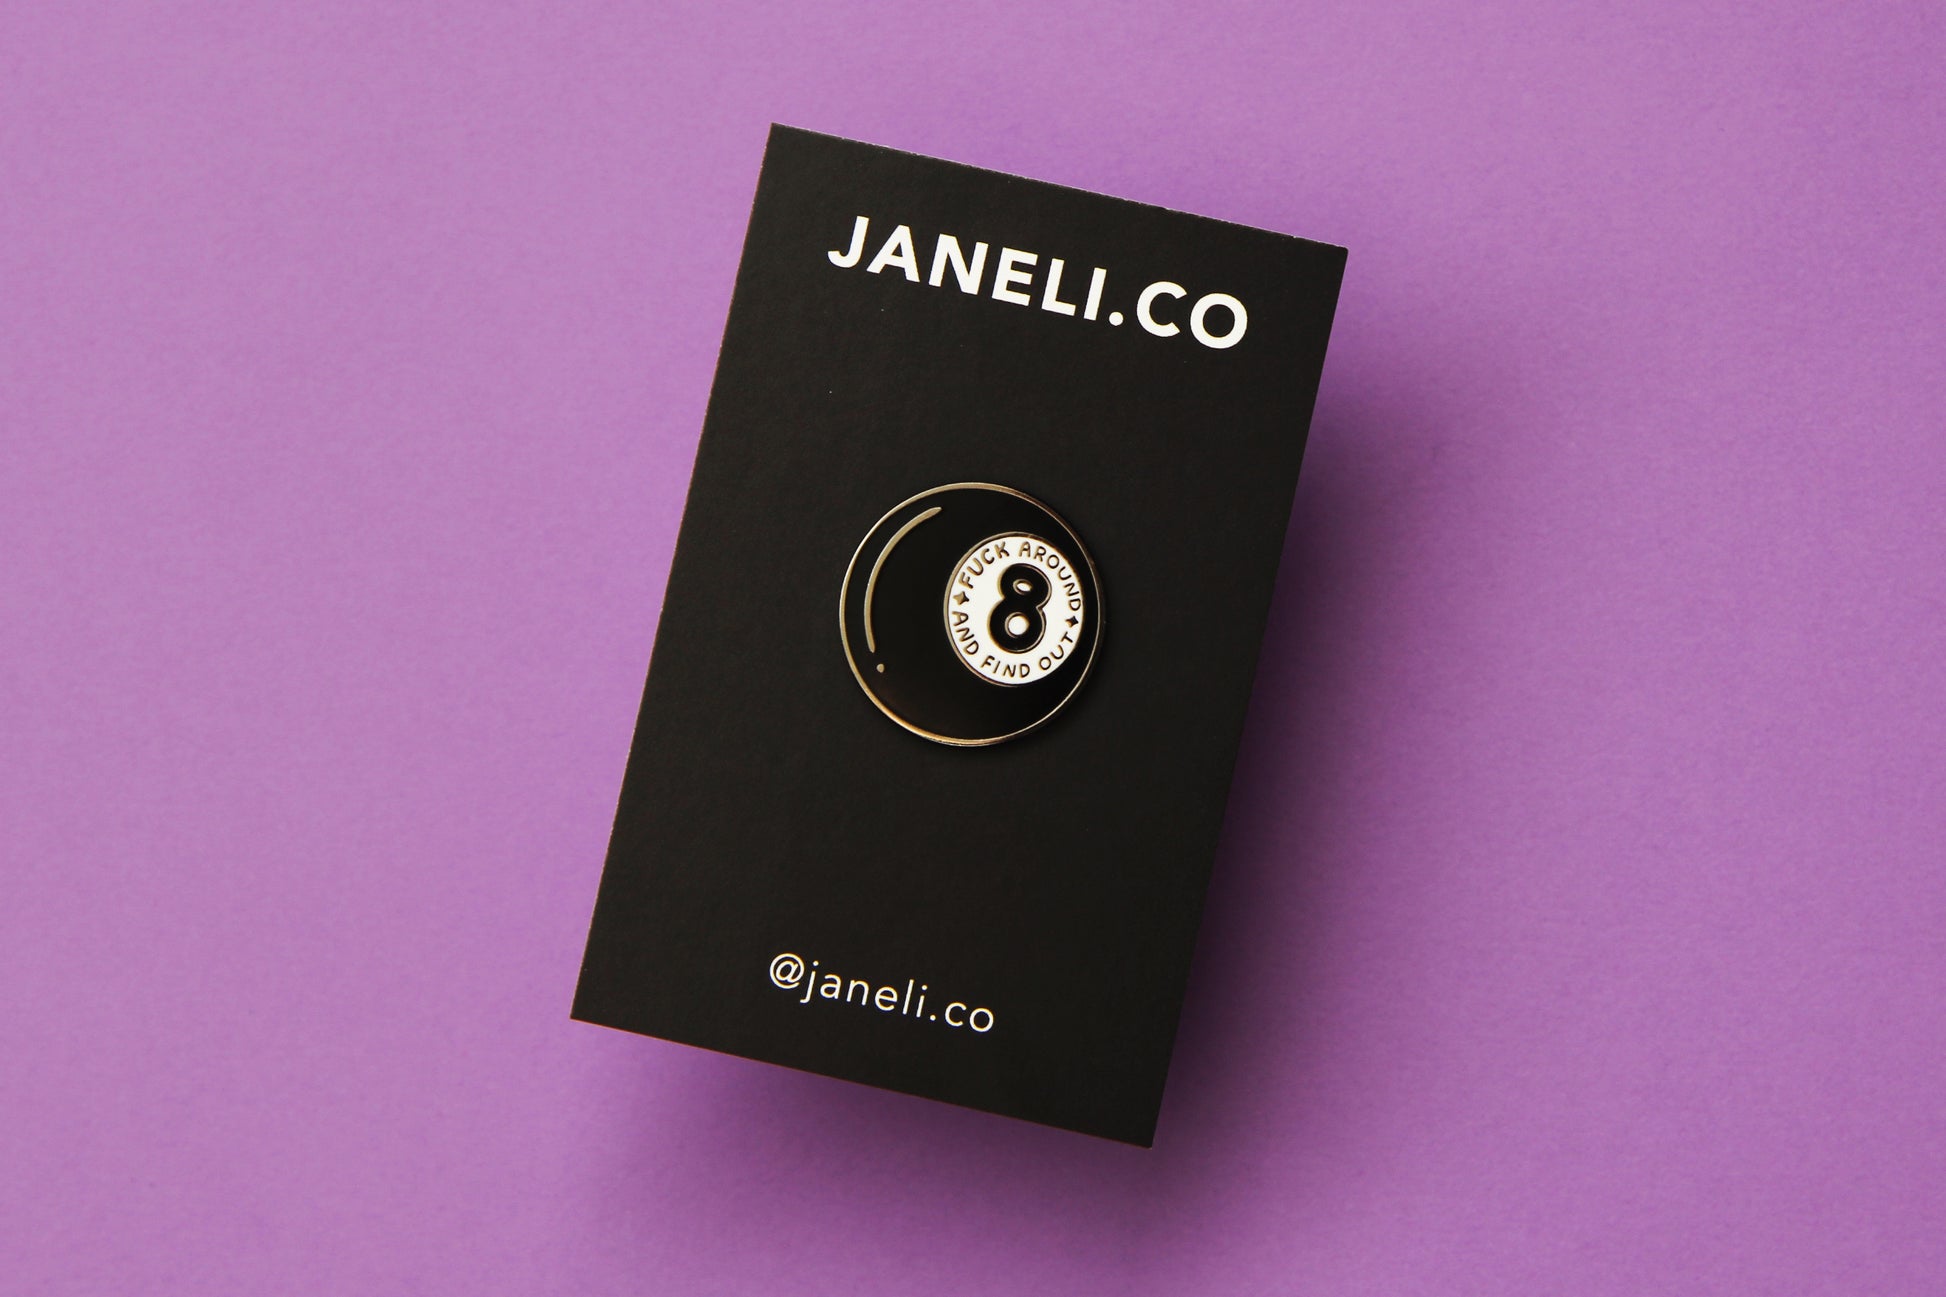 An enamel pin showing a magic 8 ball that says "Fuck around and find out" on a black JaneLi.Co backing card over a purple background.